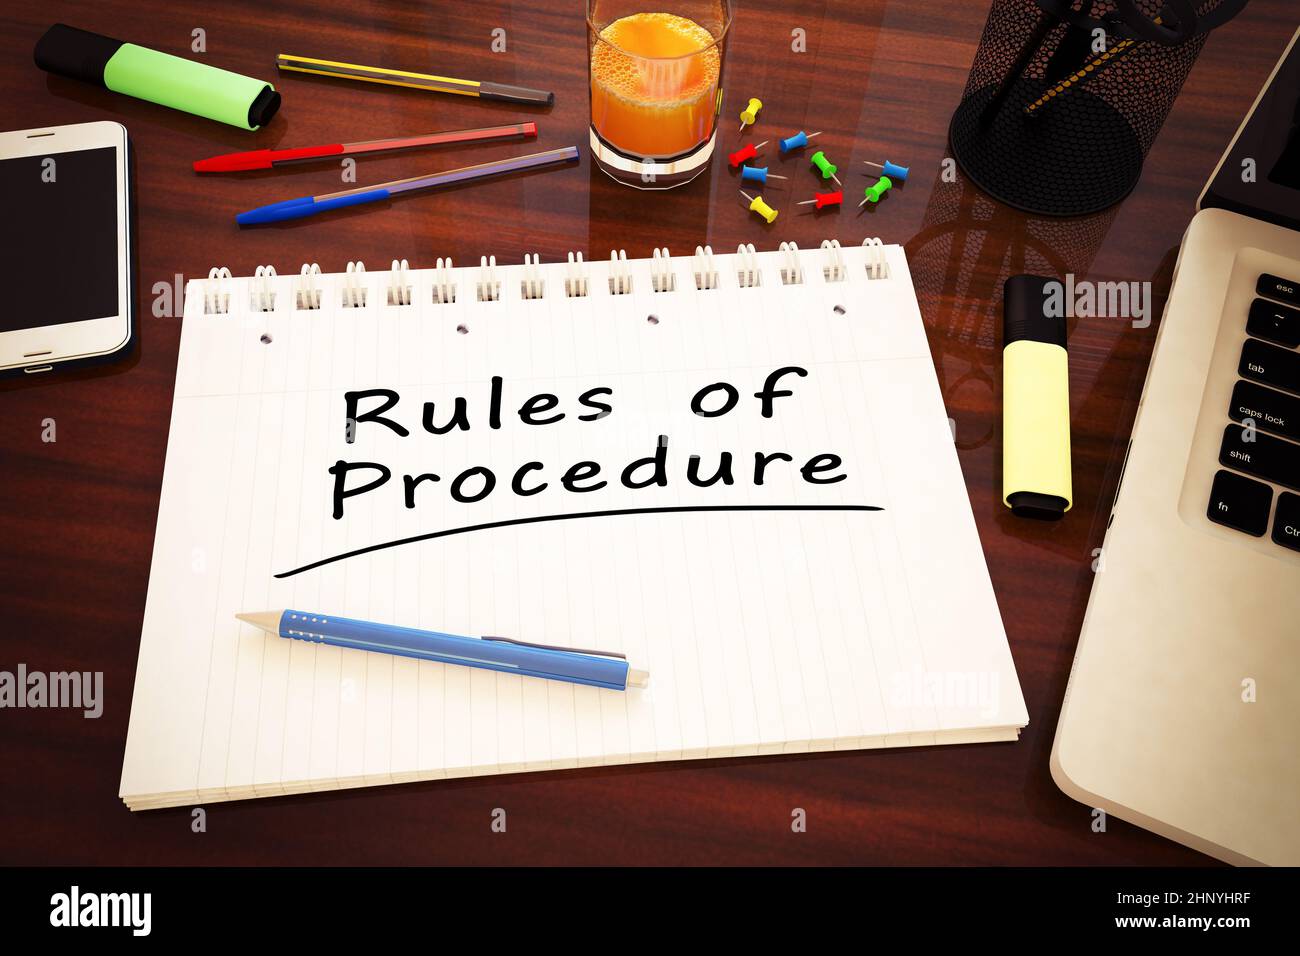 Rules of Procedure - handwritten text in a notebook on a desk - 3d render illustration. Stock Photo